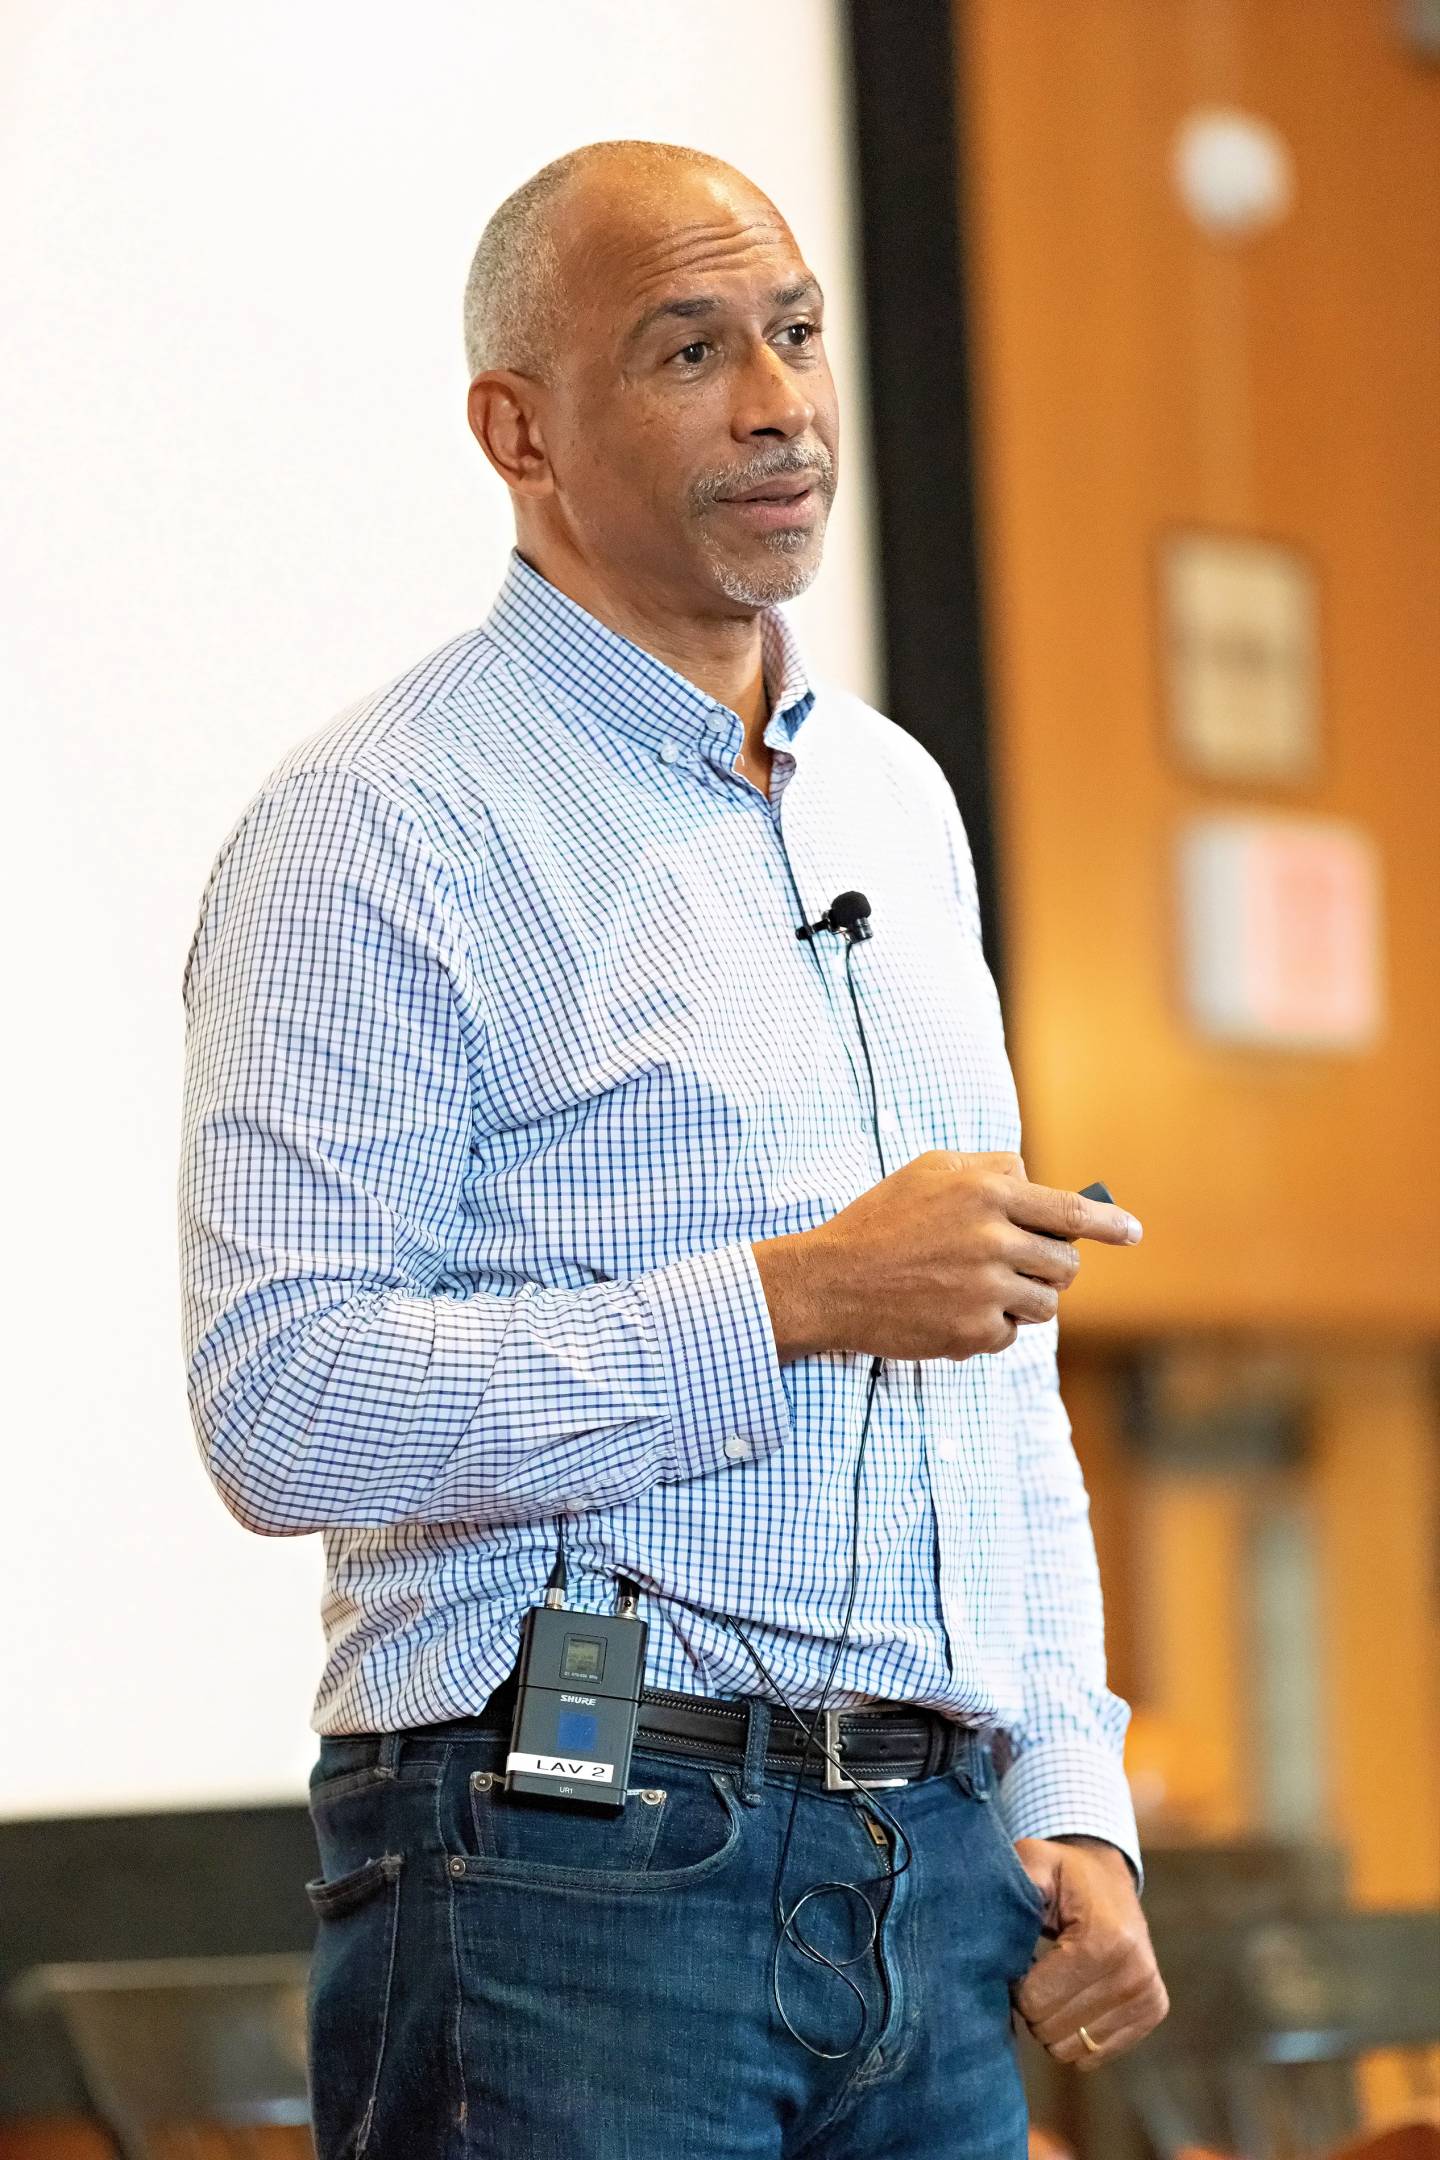 Pedro Noguera speaks to an audience